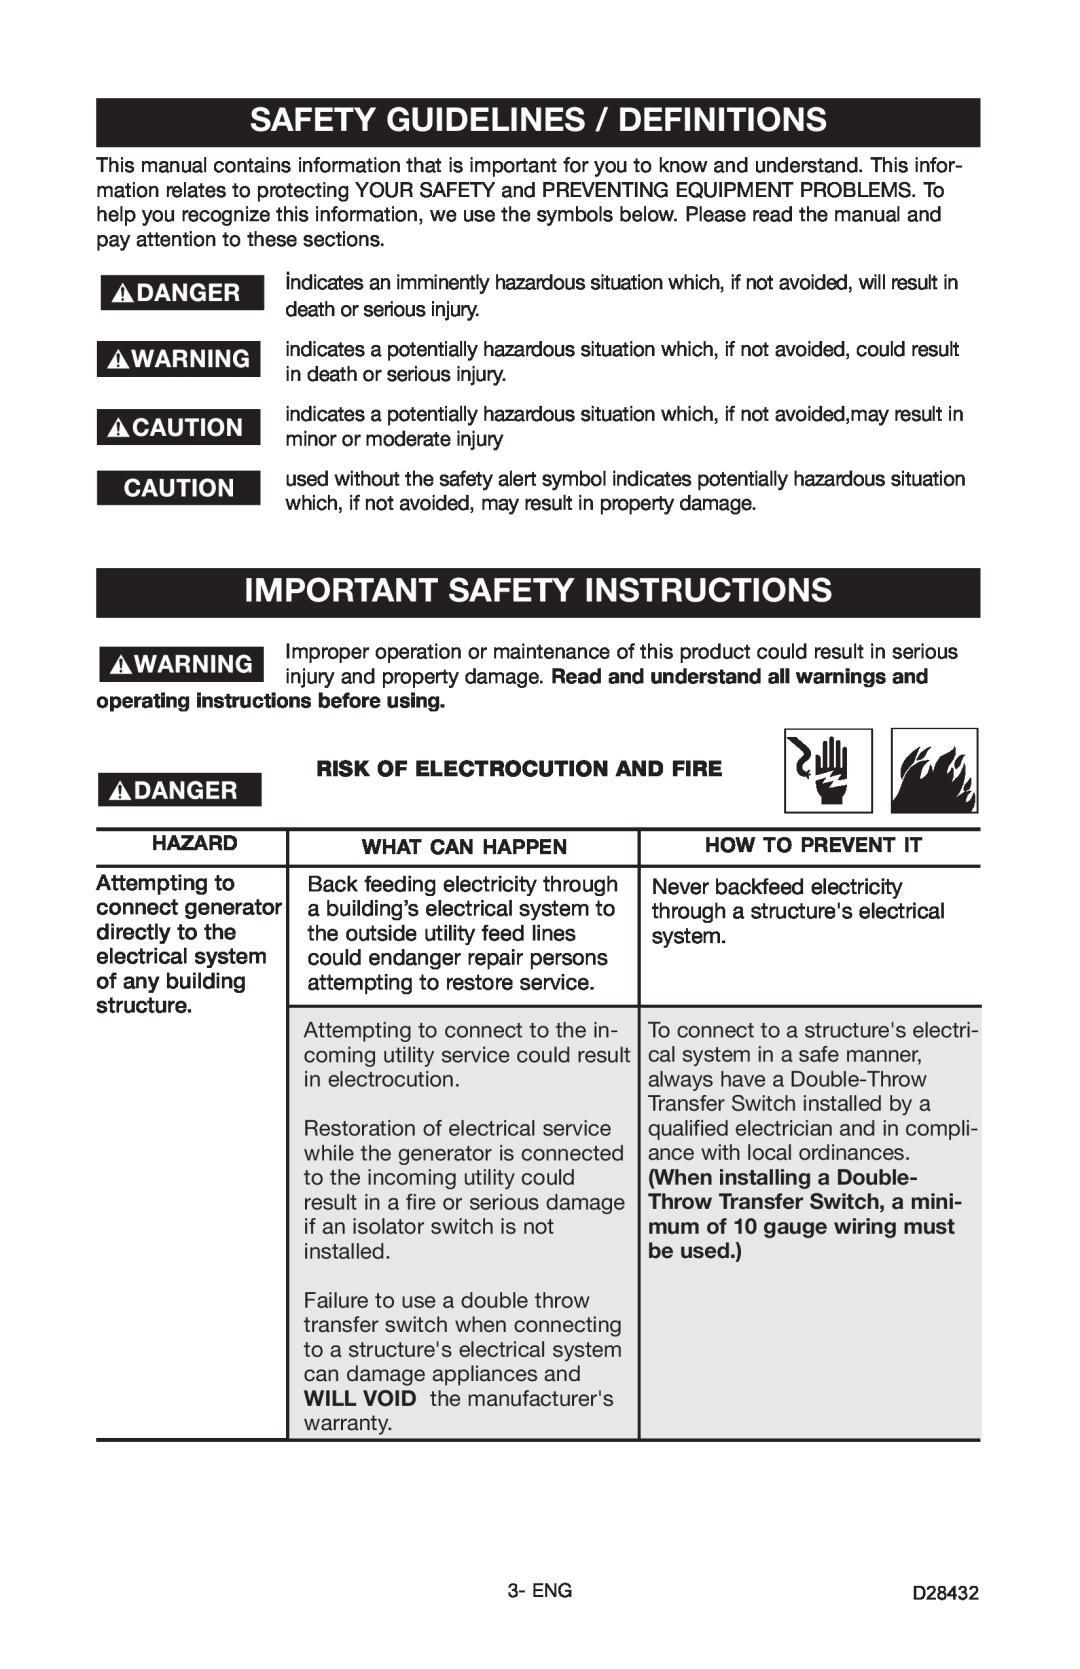 Porter-Cable CH350IS Safety Guidelines / Definitions, Important Safety Instructions, Risk Of Electrocution And Fire 